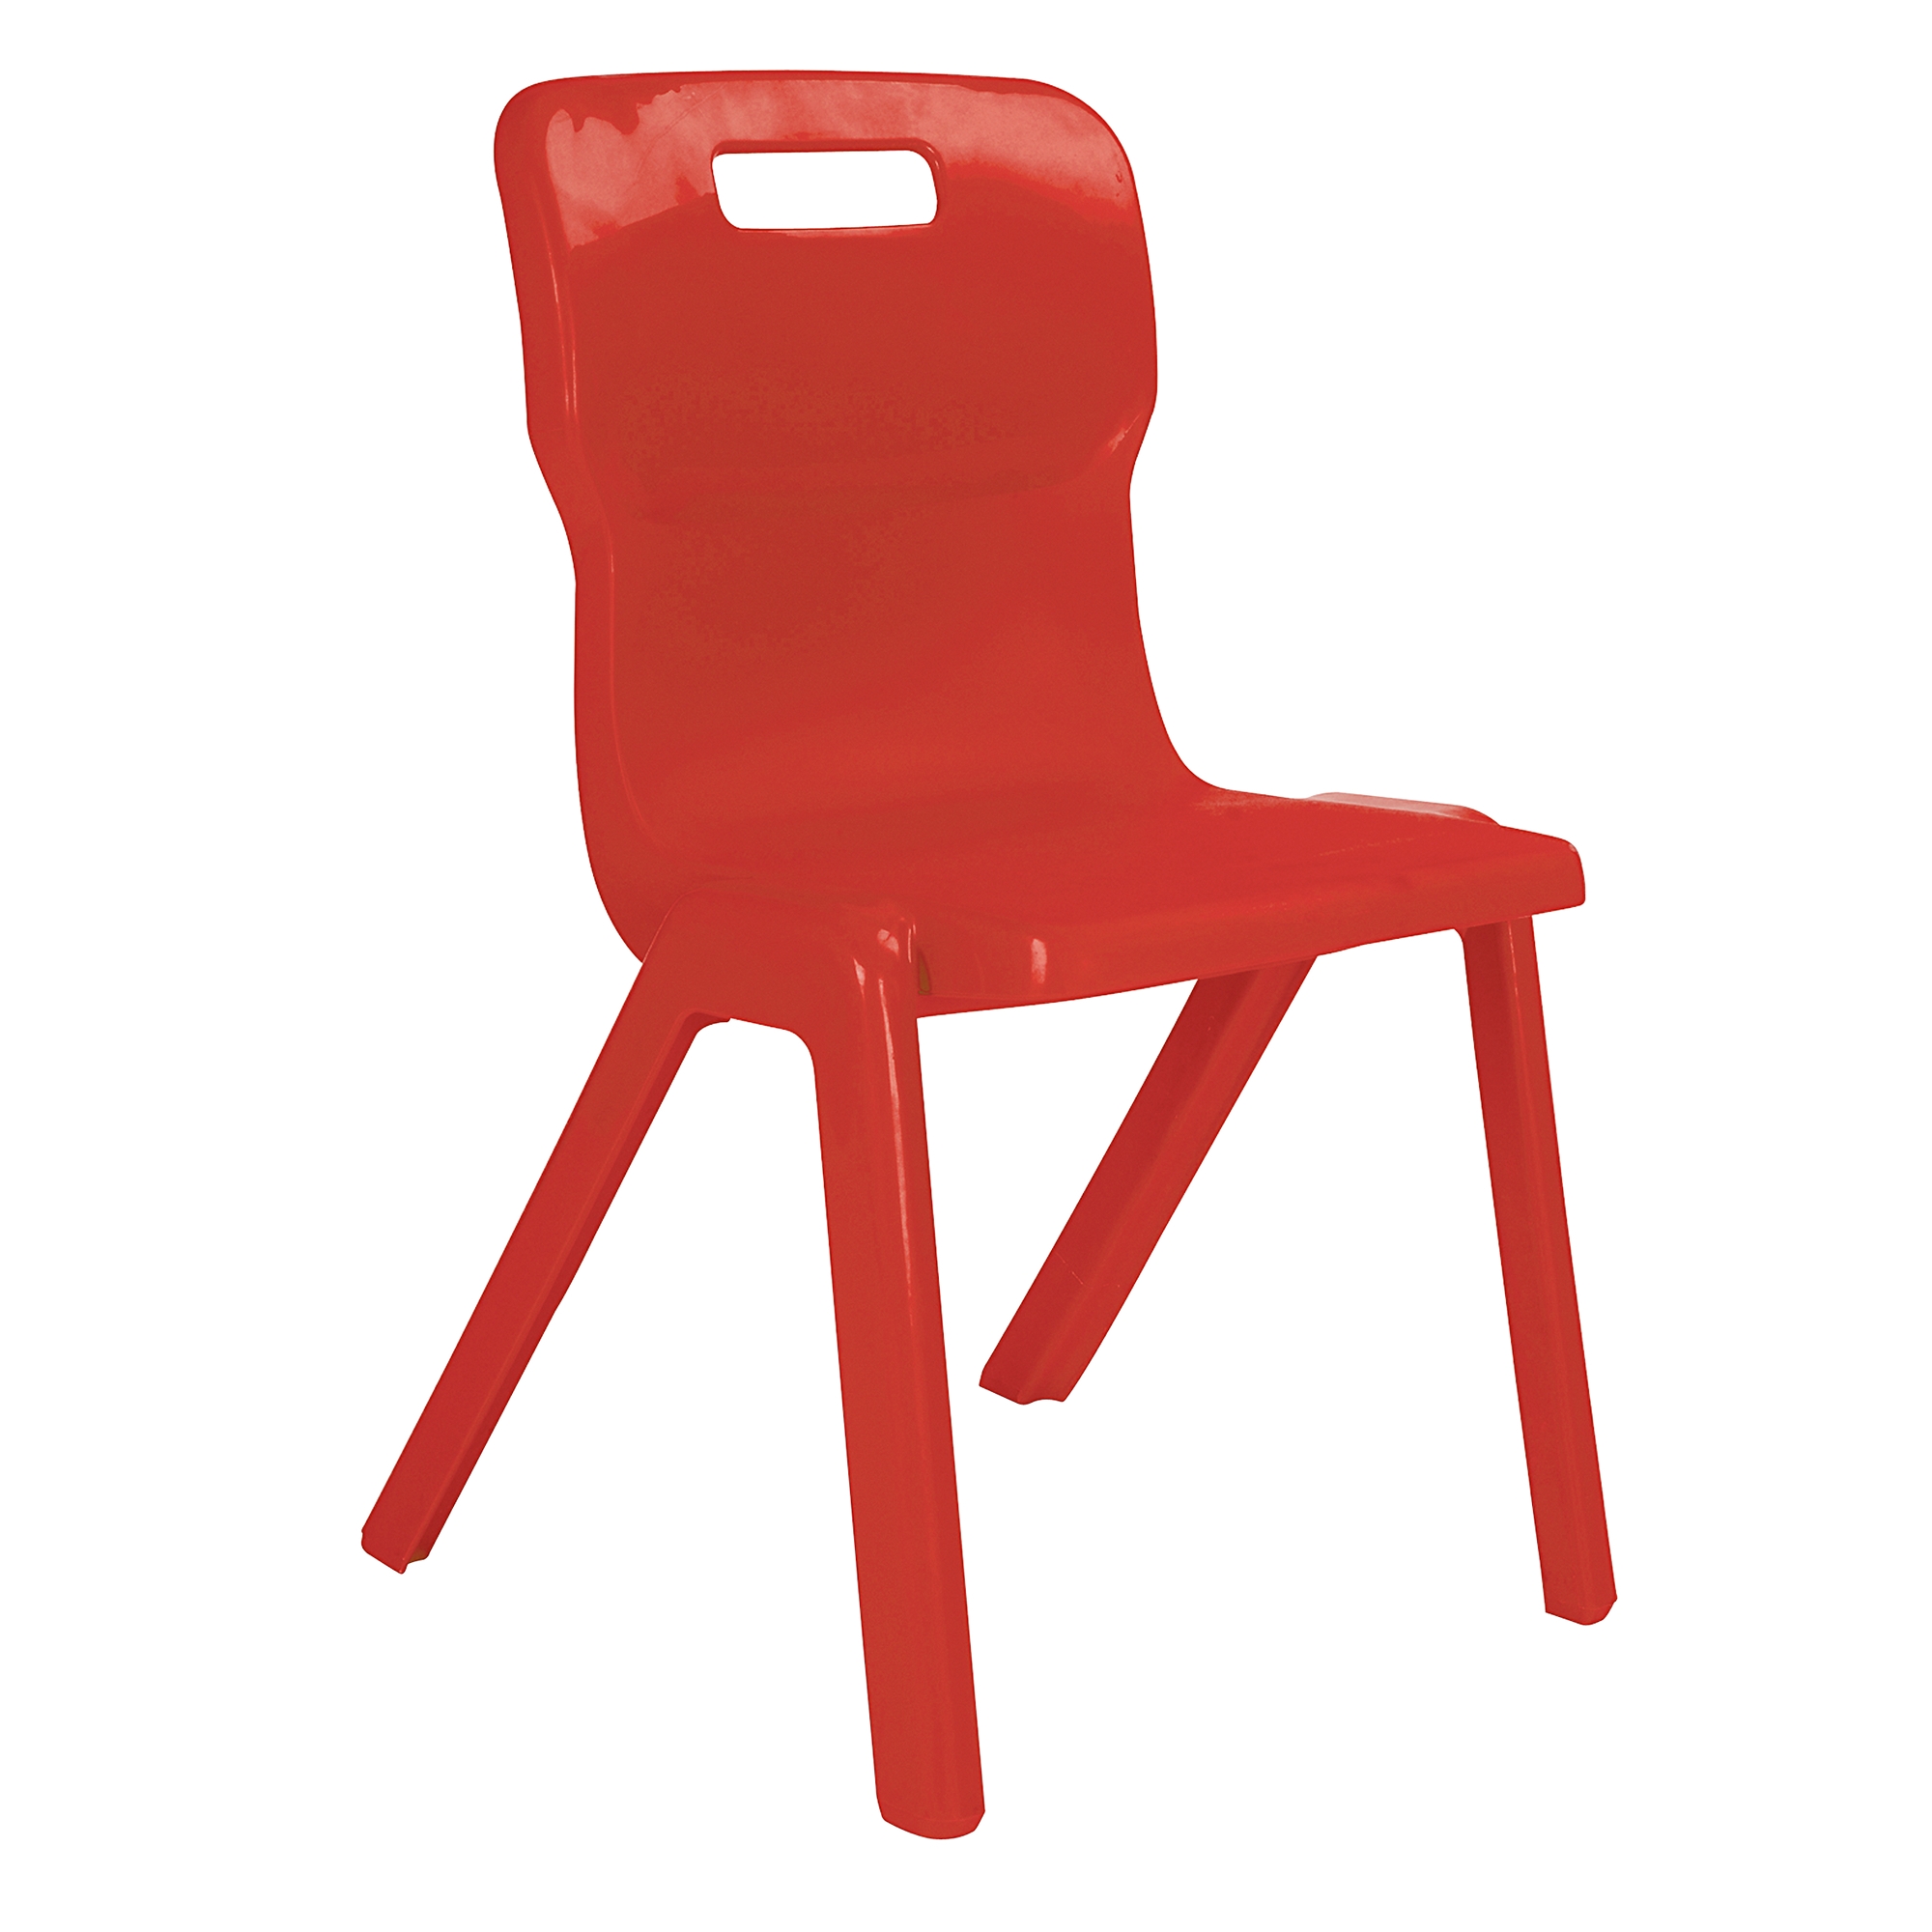 One Piece Titan Chair - Size 3 Ages 6-8 Red